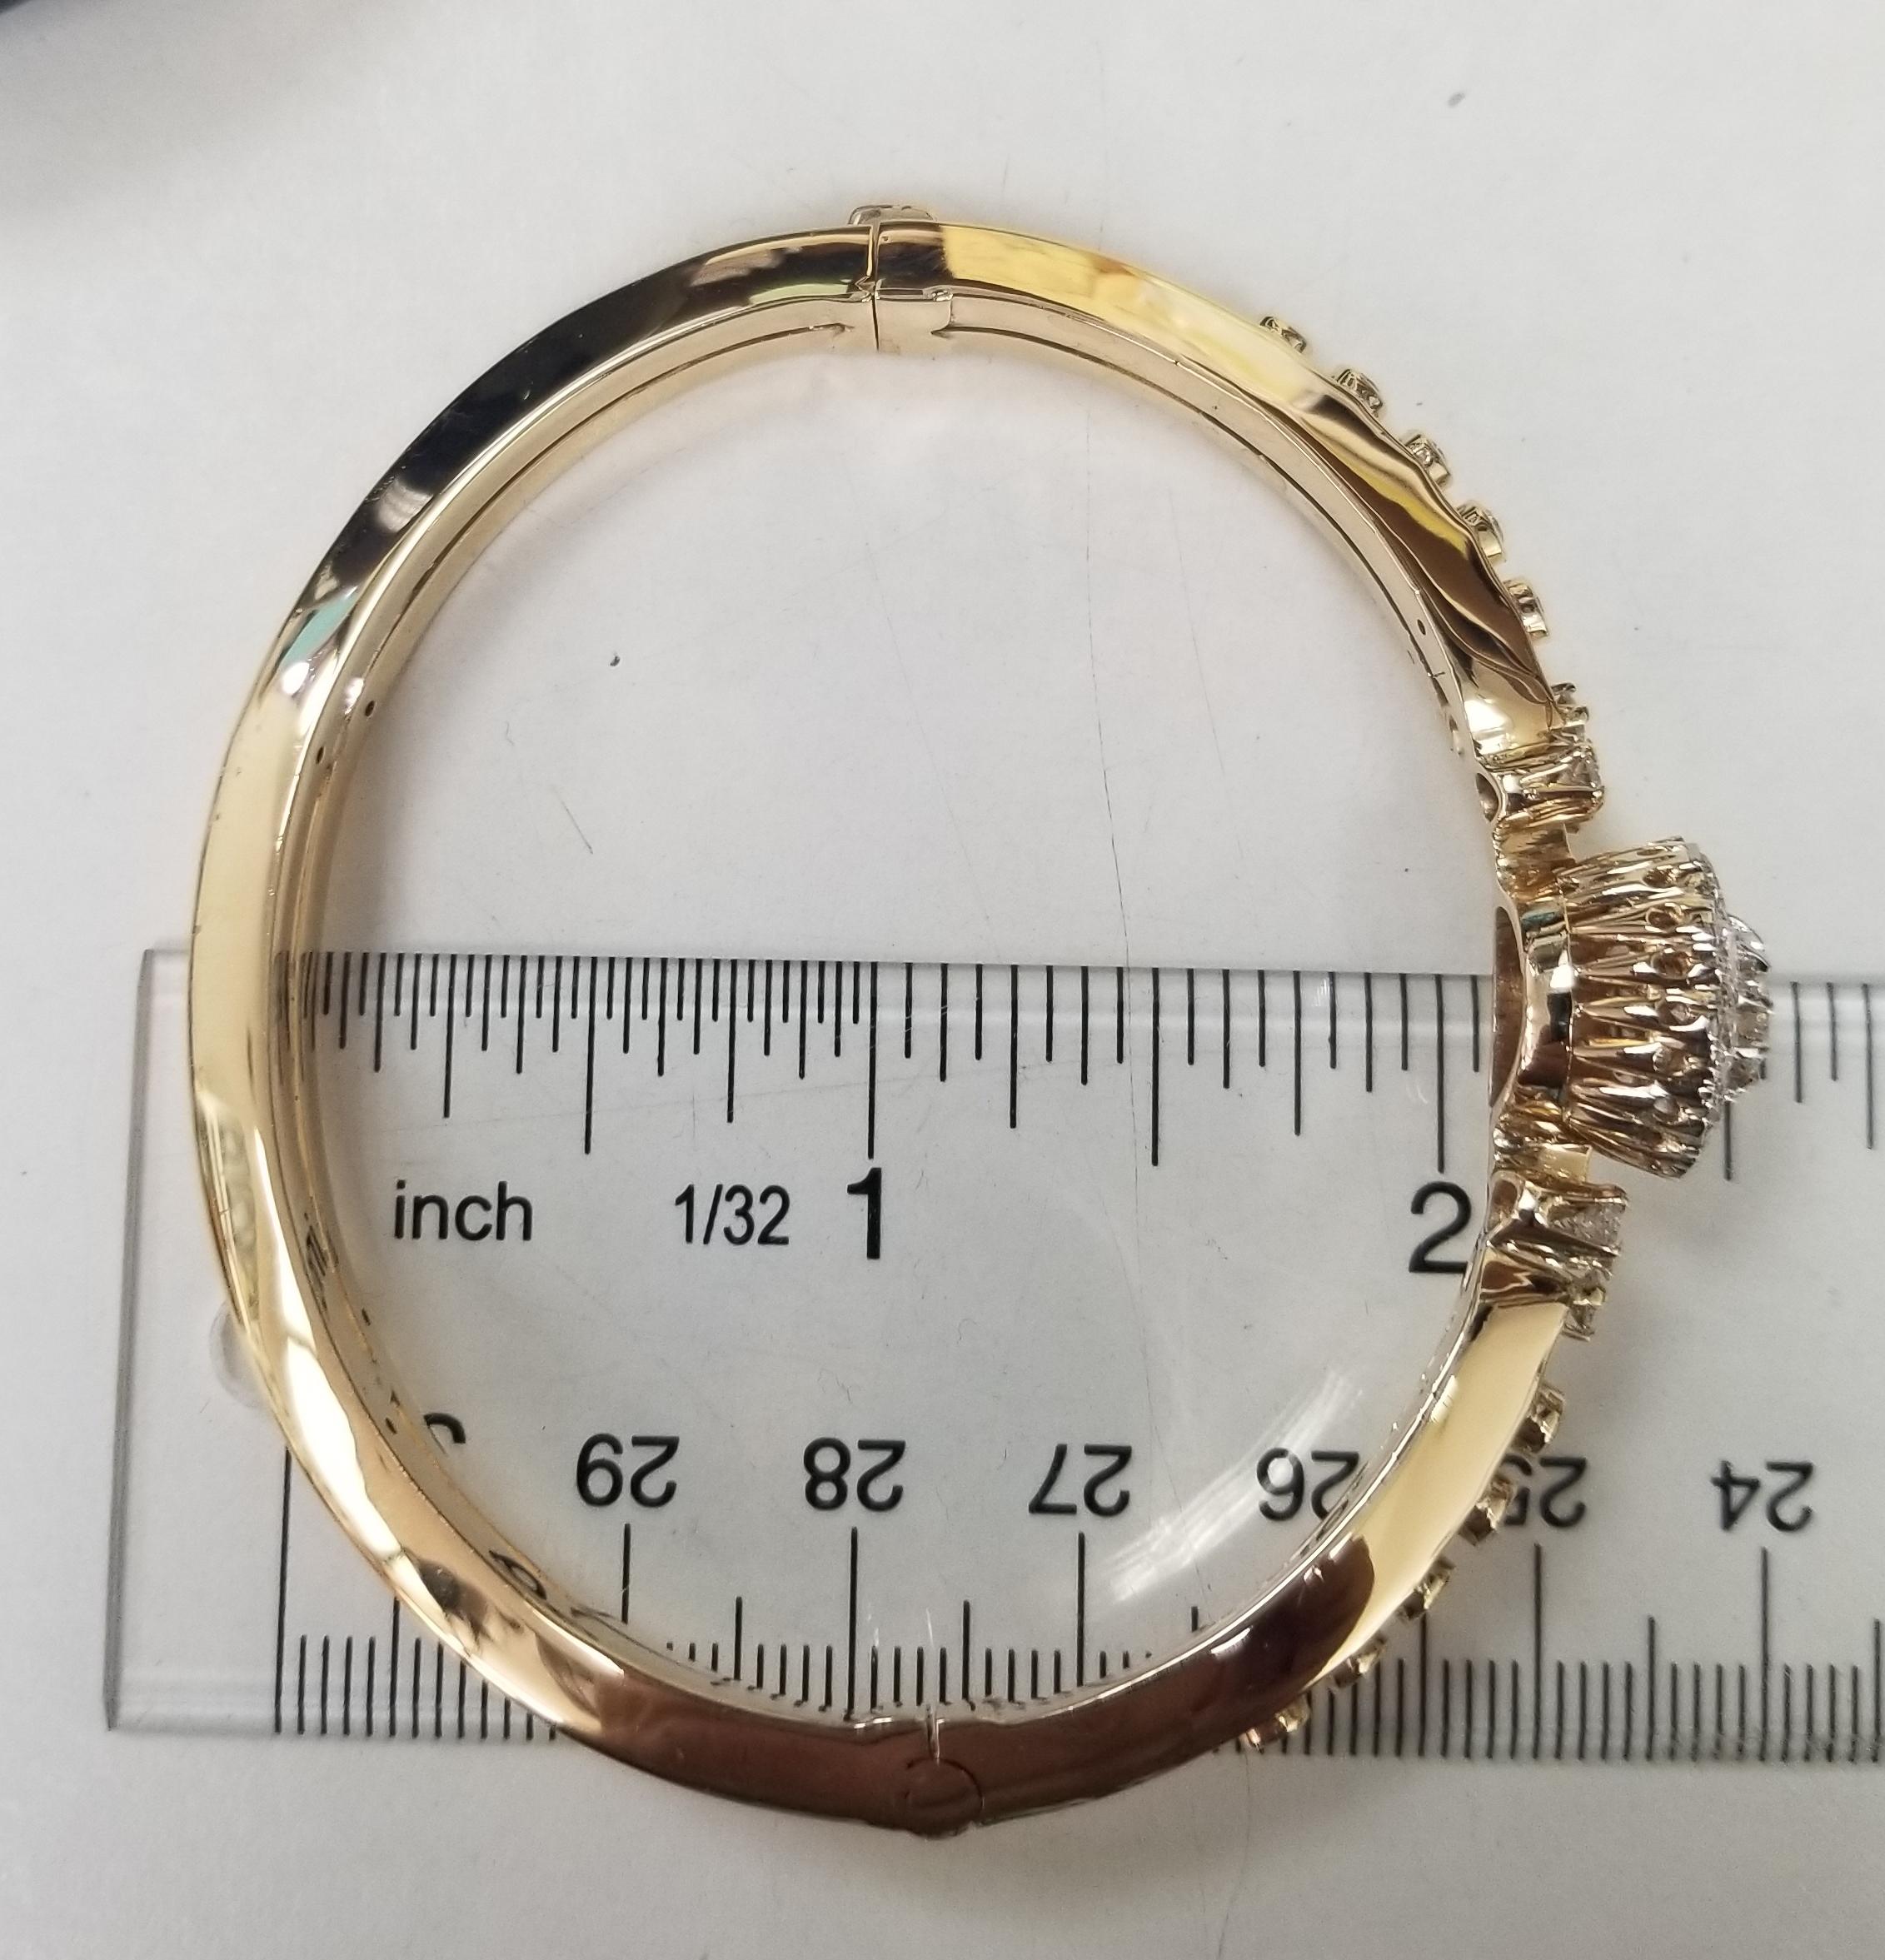 Vintage 14 Karat Yellow Gold Handmade Diamond Bangle Bracelet In Excellent Condition For Sale In Los Angeles, CA